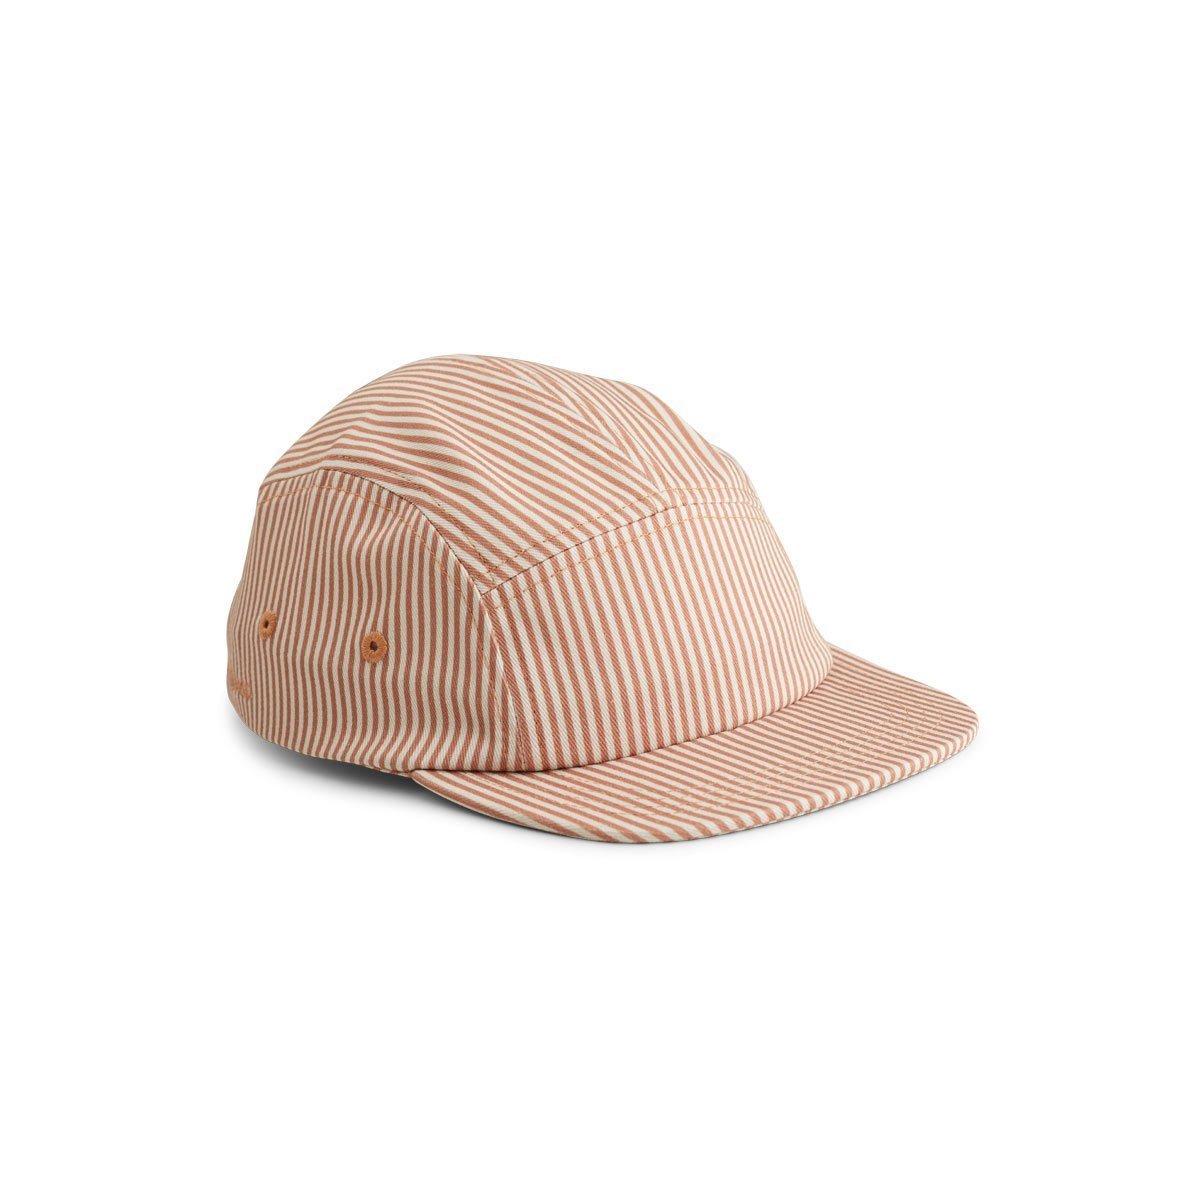 Liewood Rory Hat in Tuscany Rose/Sandy Stripe - Scandibørn